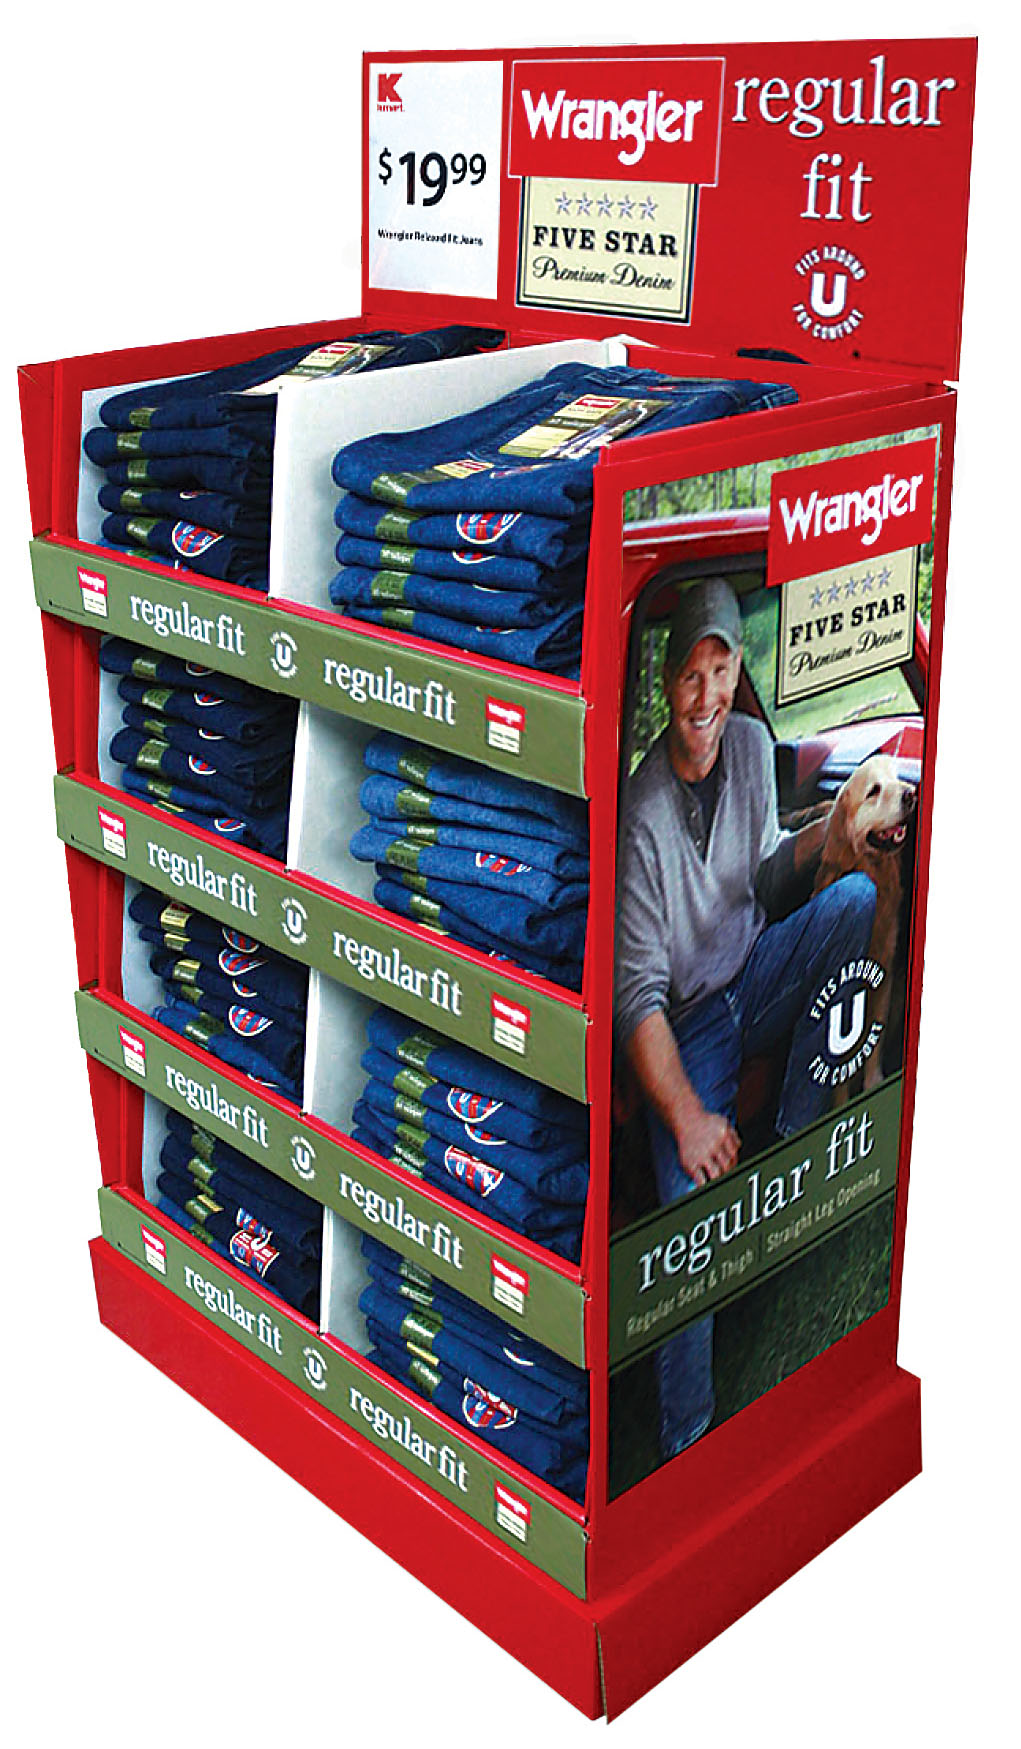 A retail POP display for Wrangler jeans